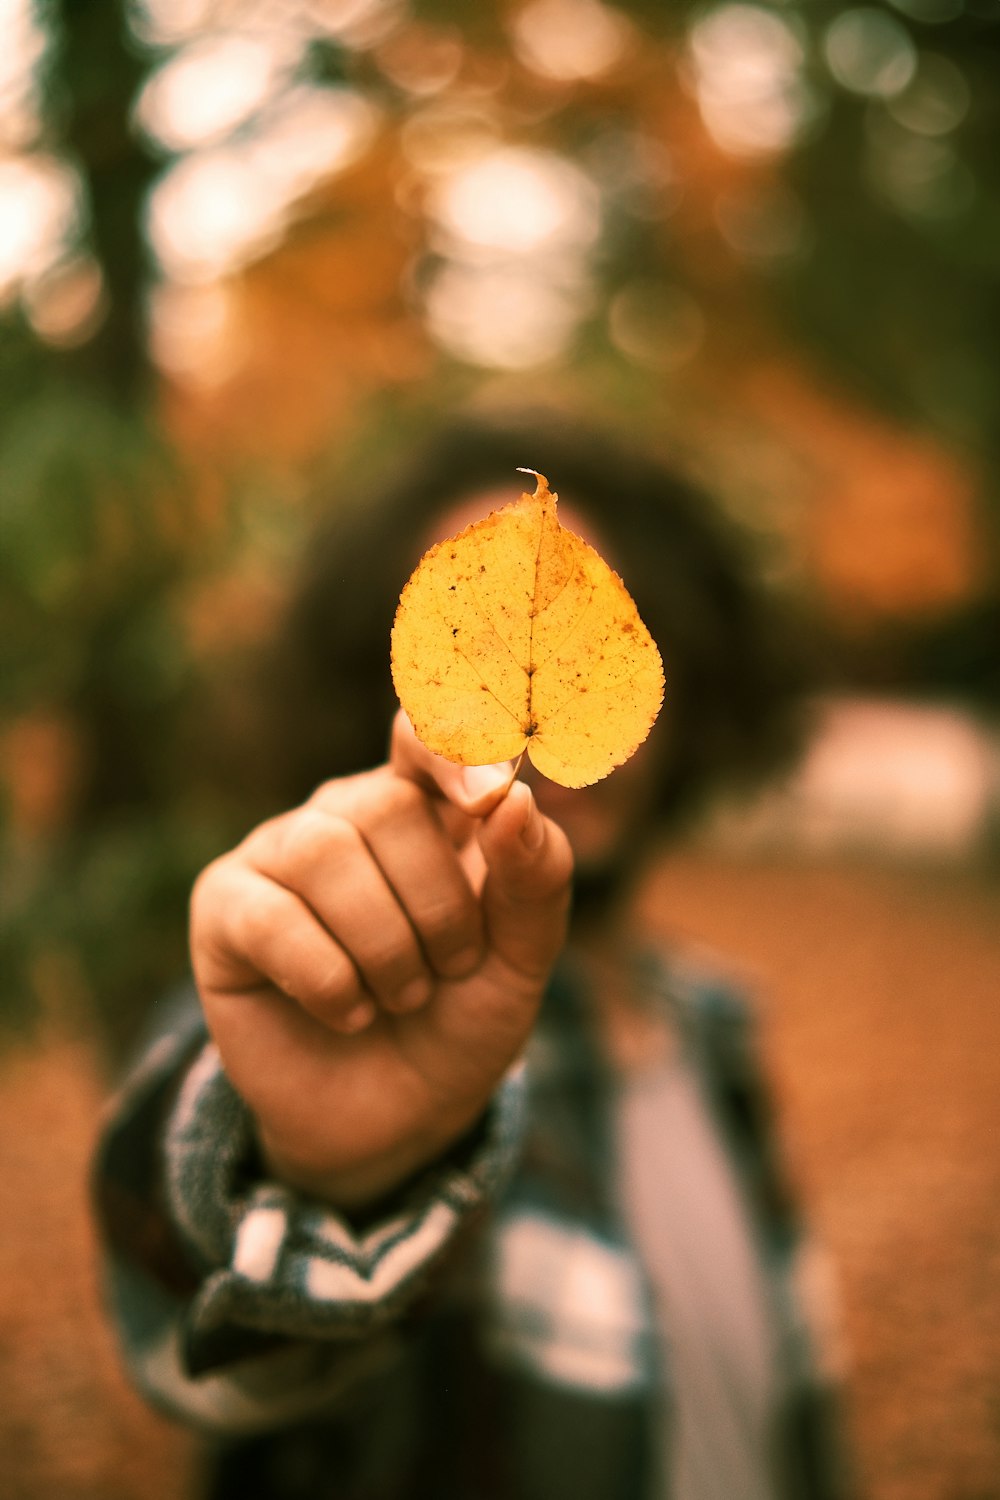 a person holding a yellow leaf in their hand